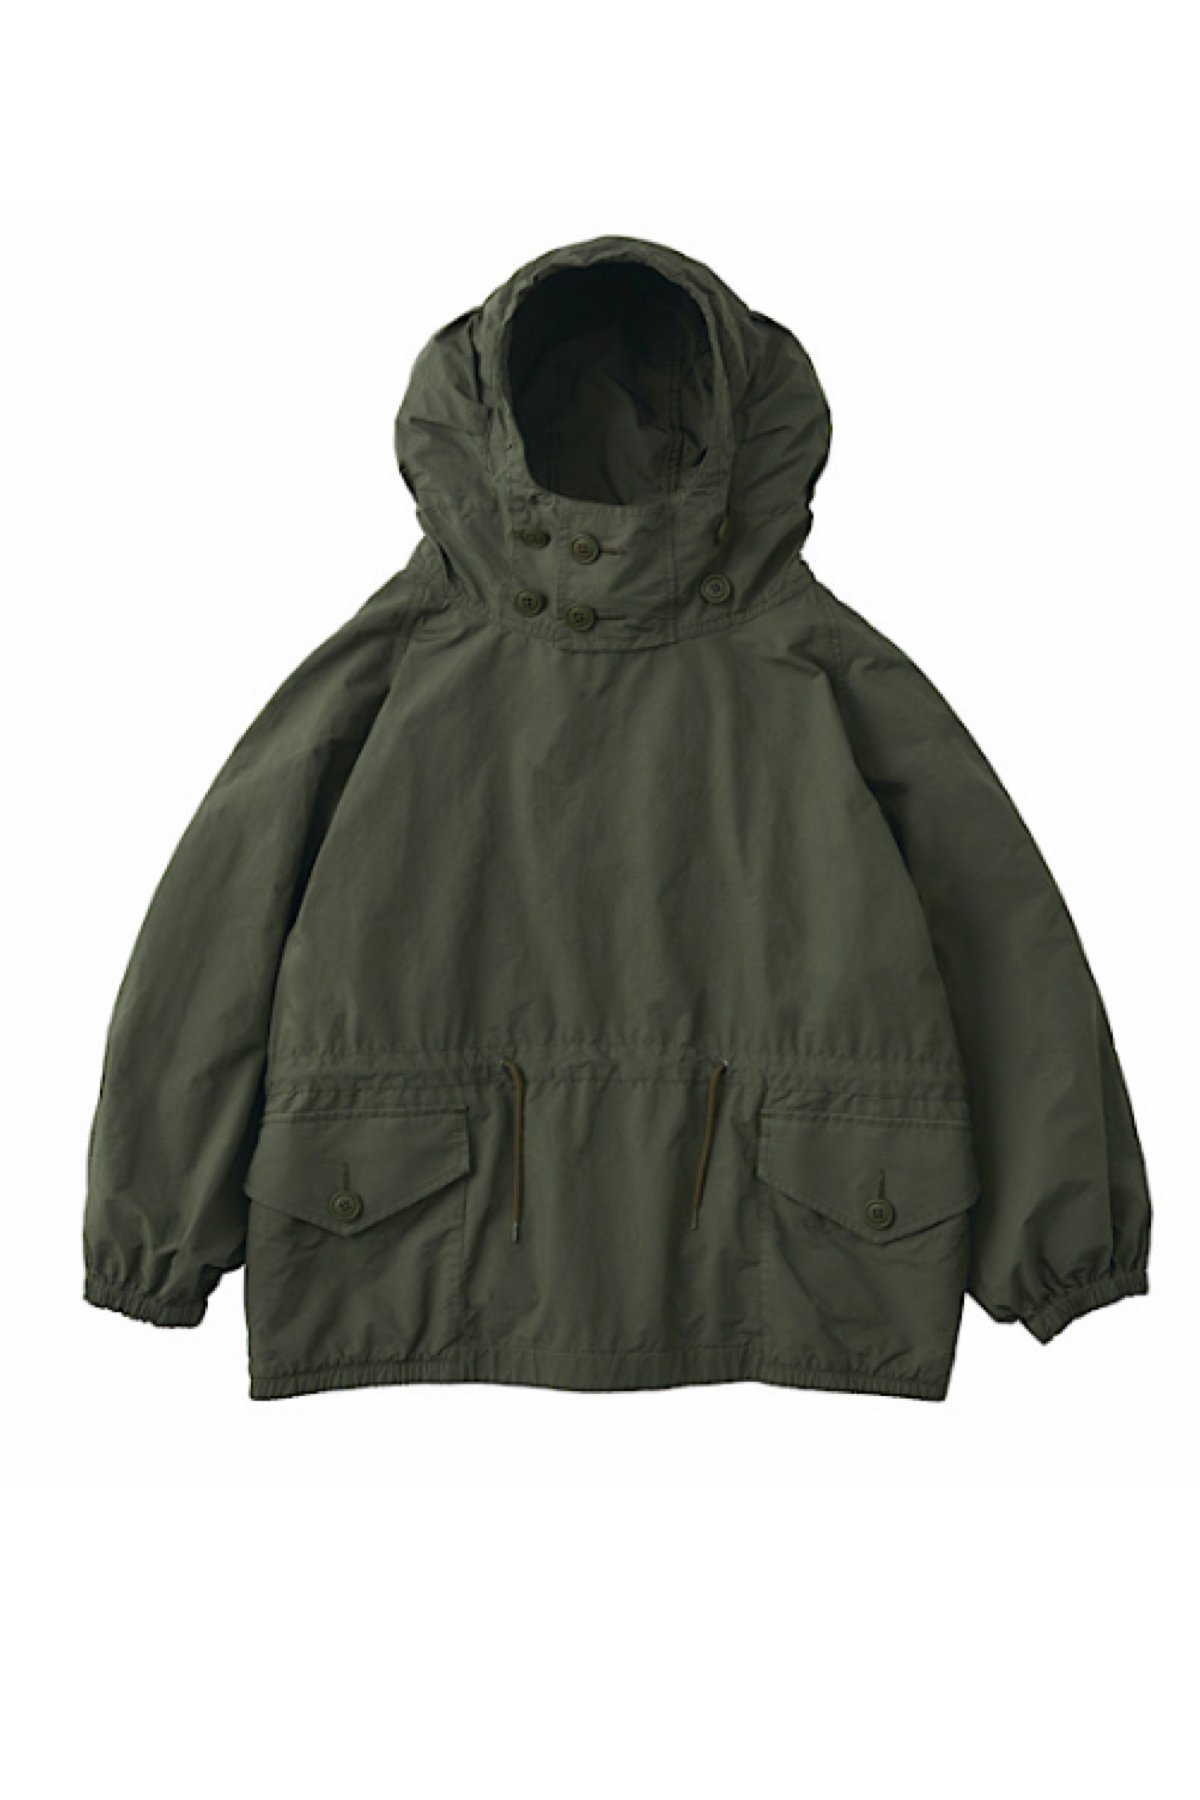 Porter Classic - FLOCKY SWEAT PARKA - RED ポータークラシック ...